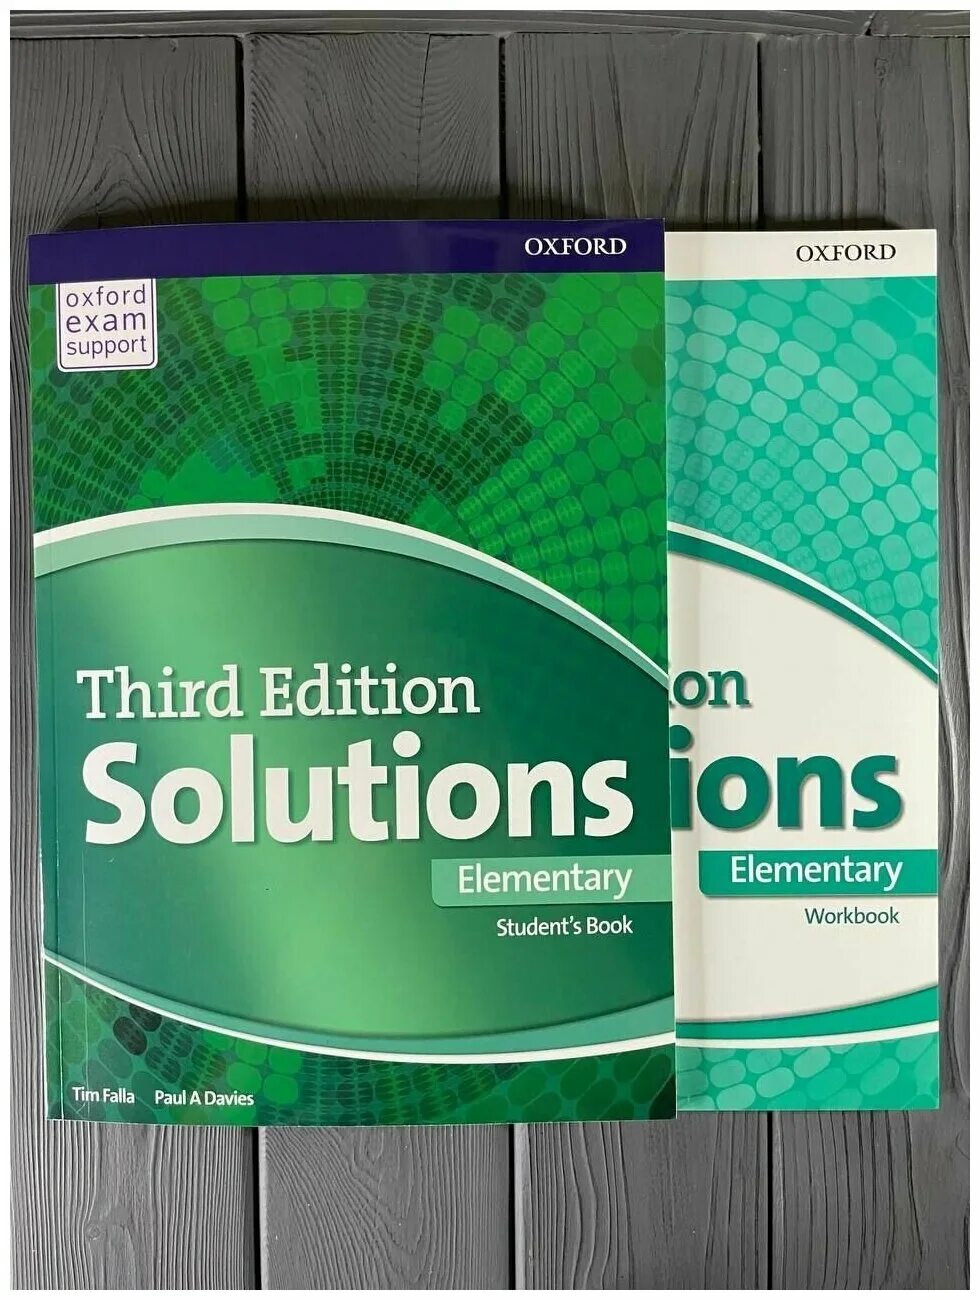 Solutions elementary students book ответы. Solutions Elementary 3rd Edition. Учебник solutions Elementary 3 Edition. Third Edition solutions Elementary. Oxford solutions Elementary.